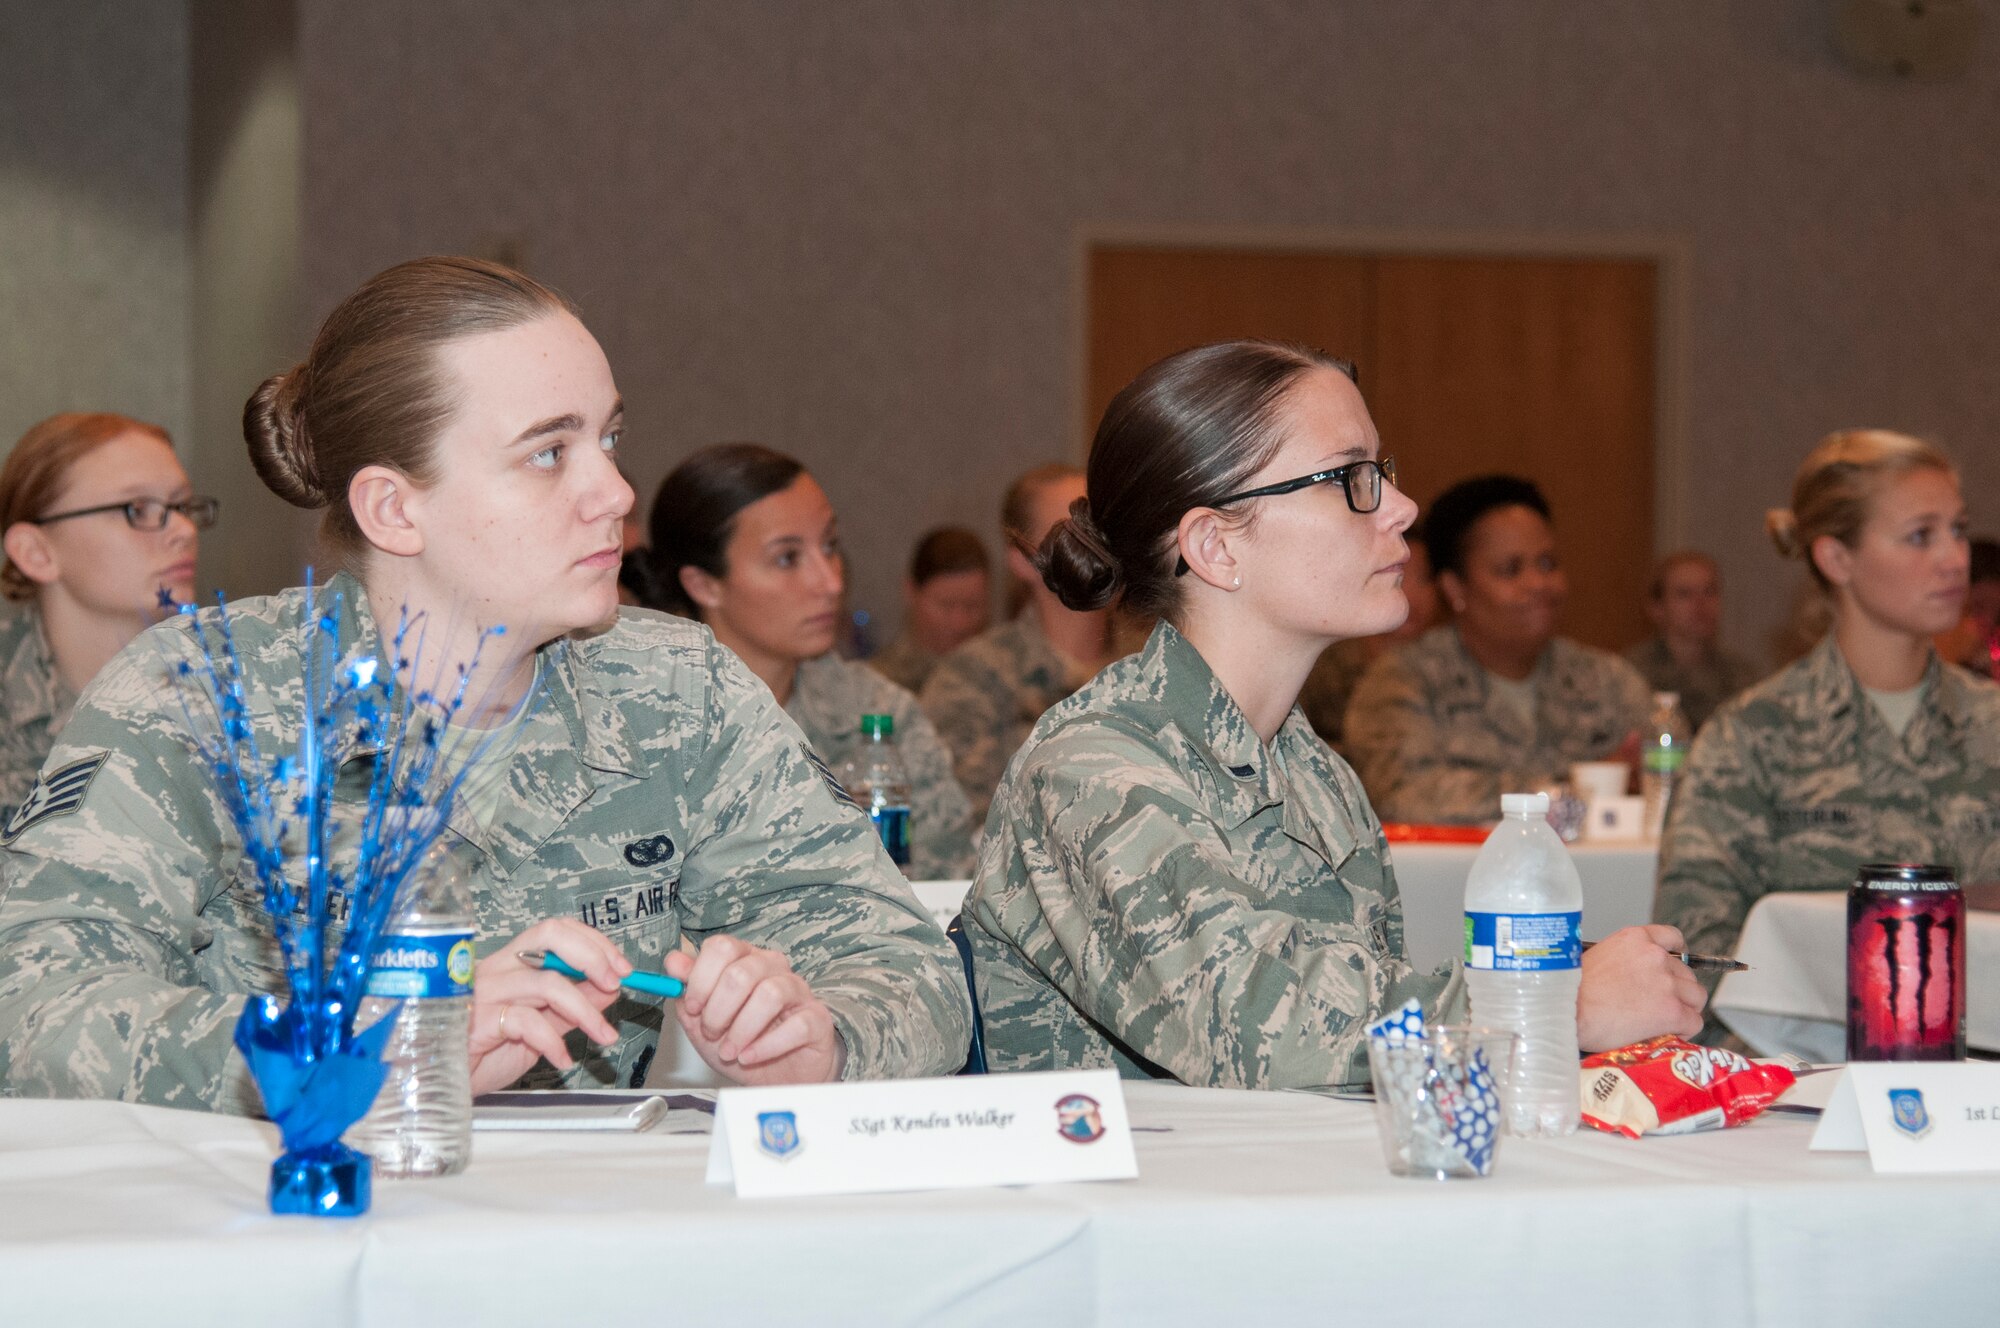 Staff Sgt. Kendra Walker, 90th Missile Security Forces Squadron, and 1st Lt. Kayla Haven, 321st Missile squadron, listen to a speaker at the 20th Air Force Women’s Leadership Symposium on the F.E. Warren Air Force Base, Wyo., Trail’s End Event Center Sept. 16, 2015. Women from across the 20th Air Force came to the ICBM Center for Excellence’s event to discuss leadership issues in the numbered air force. (U.S. Air Force photo by Senior Airman Jason Wiese)